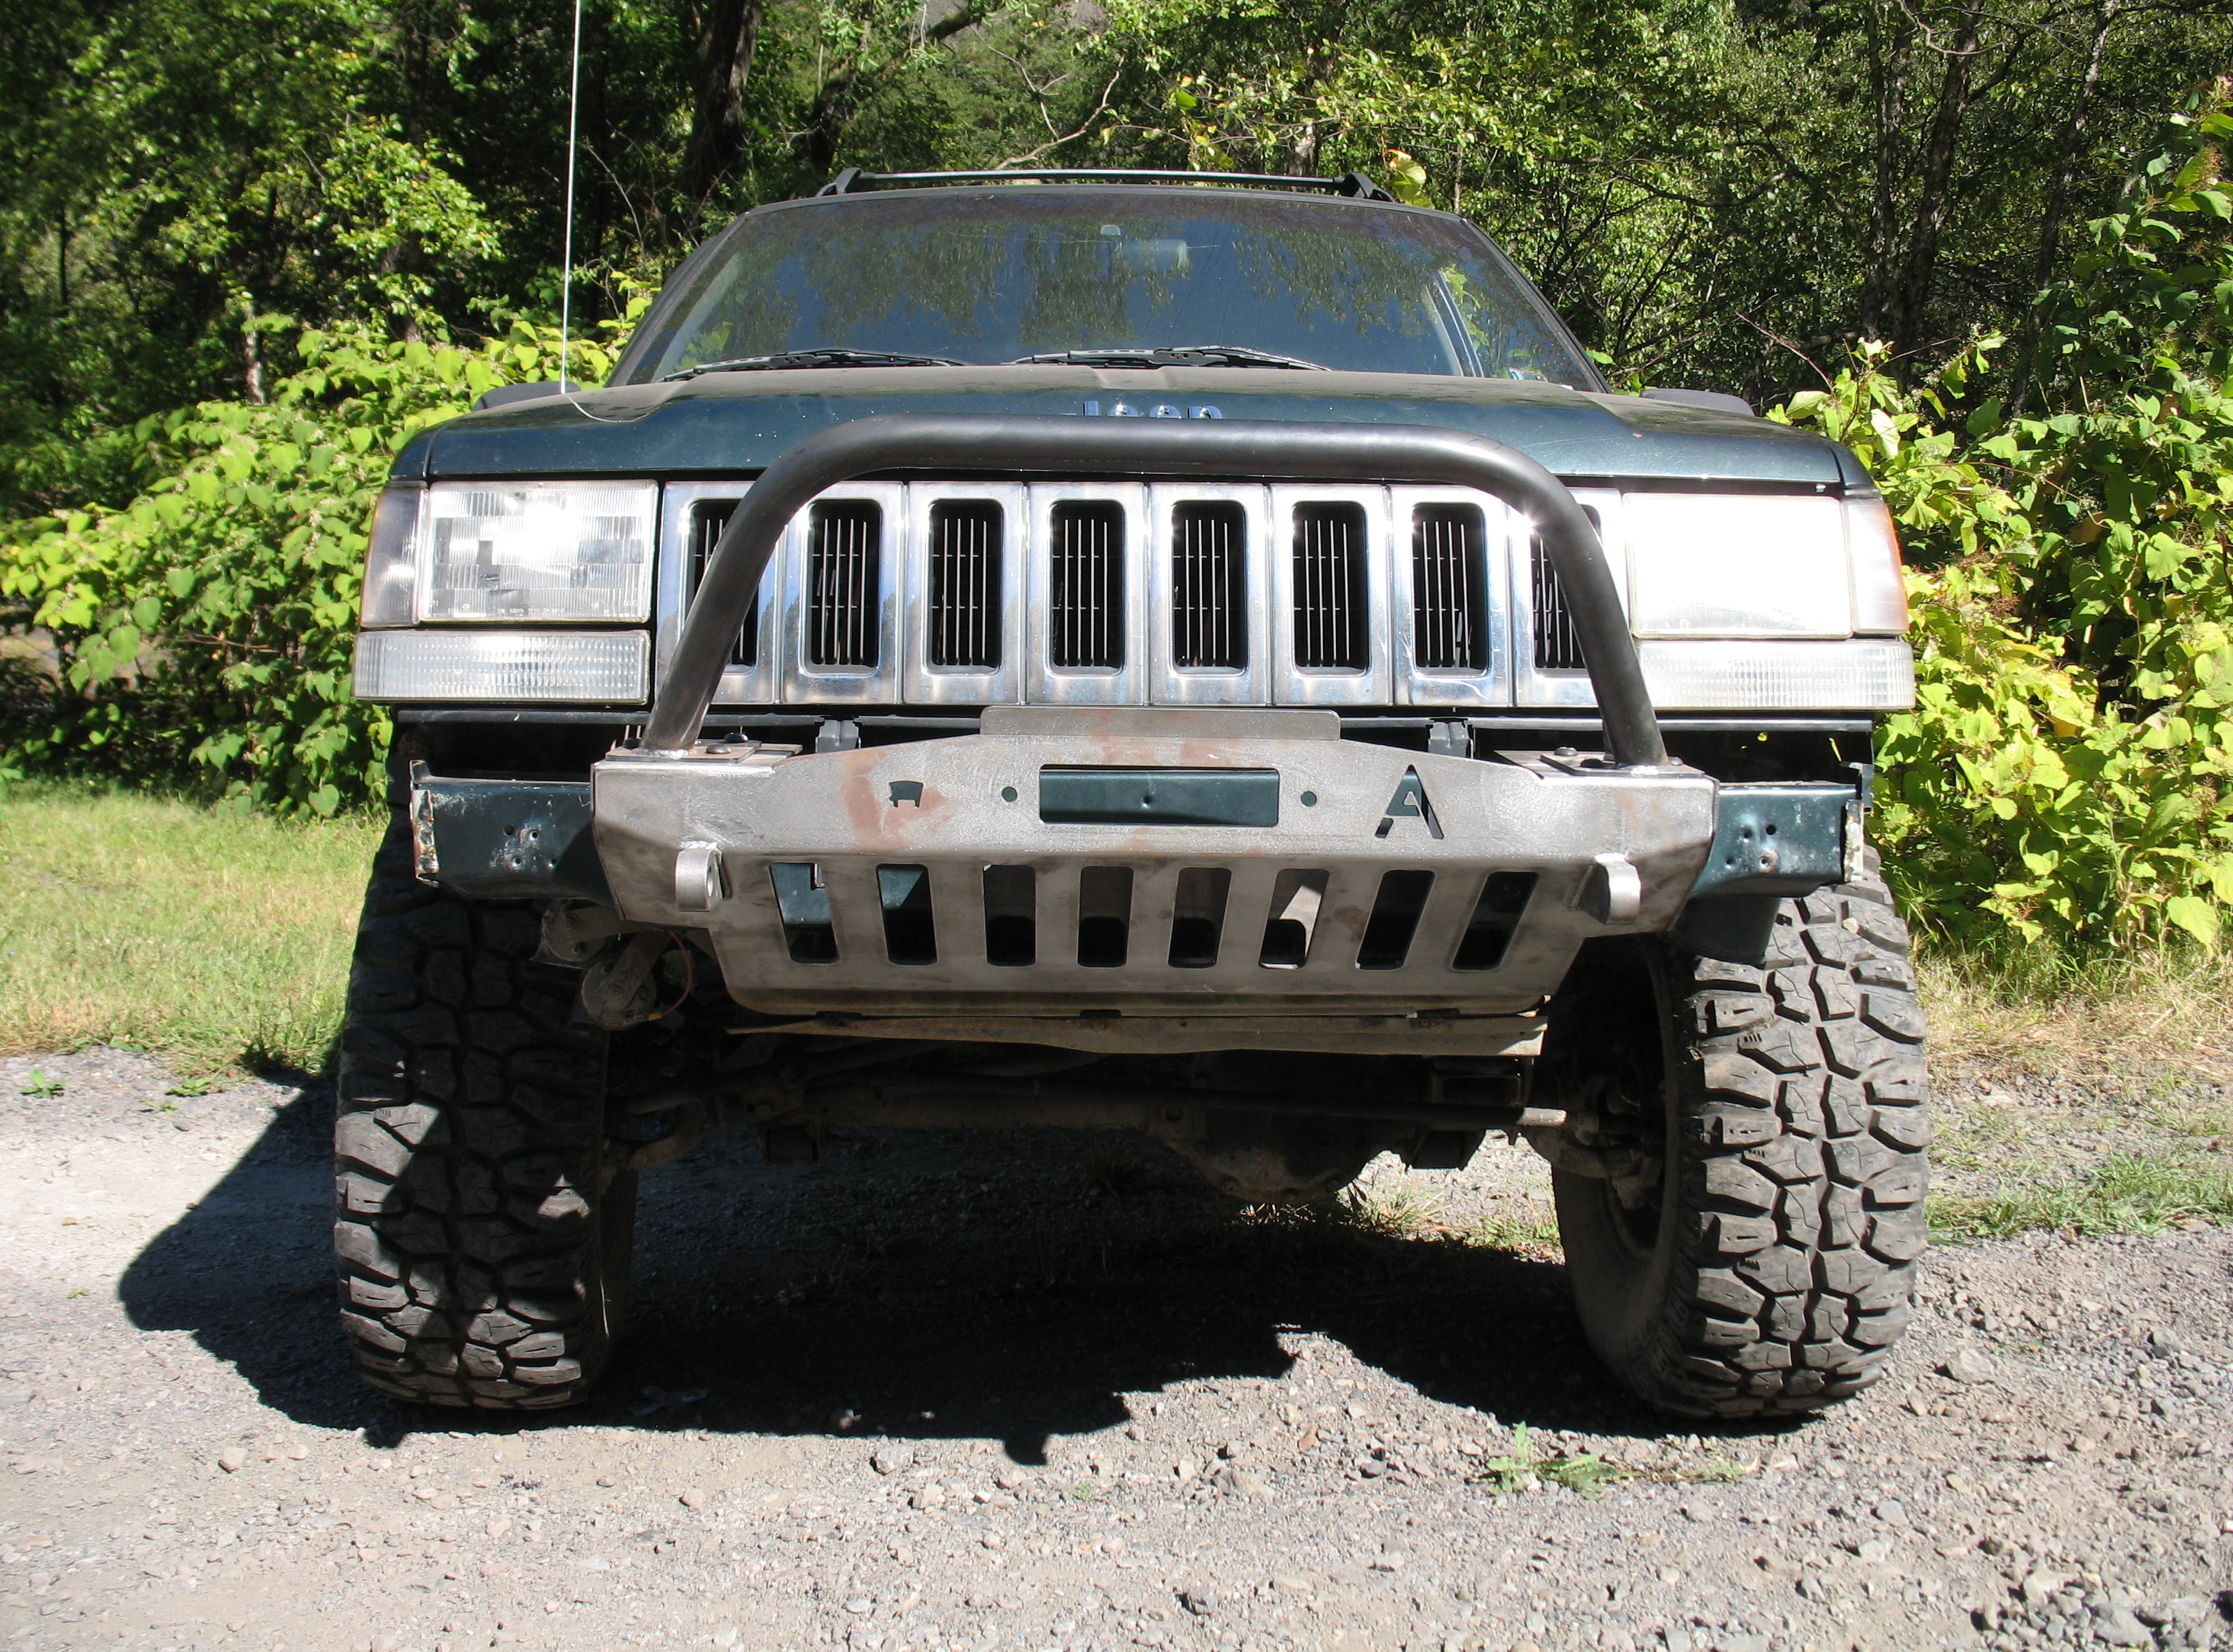 Affordable Offroad Bumpers Parts For Offroad Vehicles